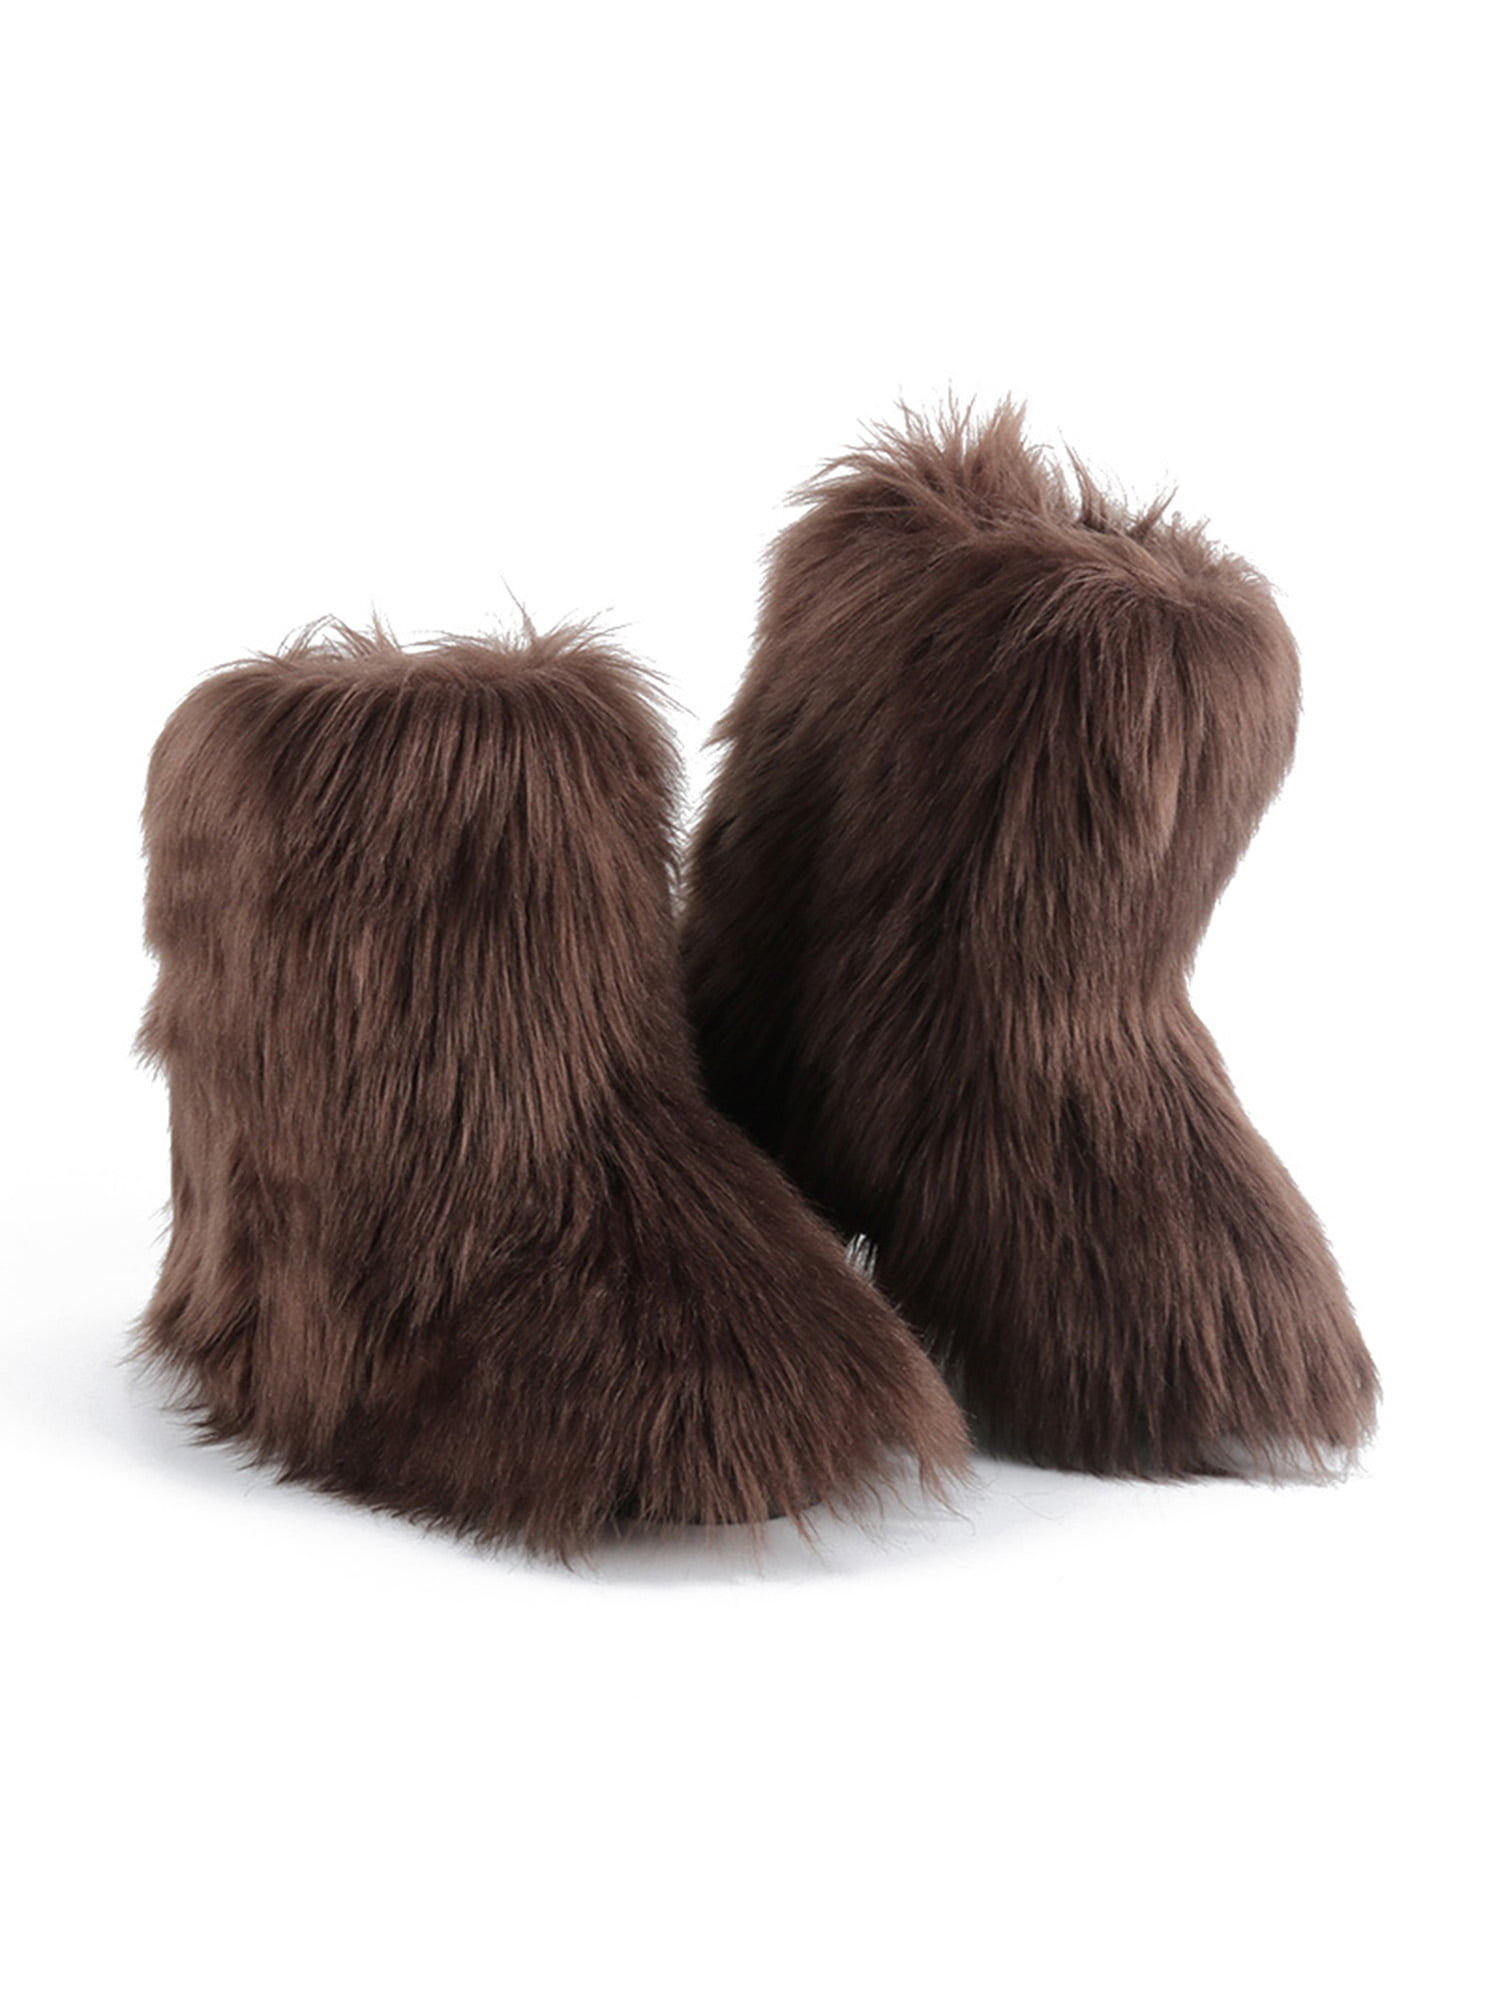 Women's Warm Winter Fur Lined Snow Pull On Oxford Buckle Mid Calf Boots Shoes 